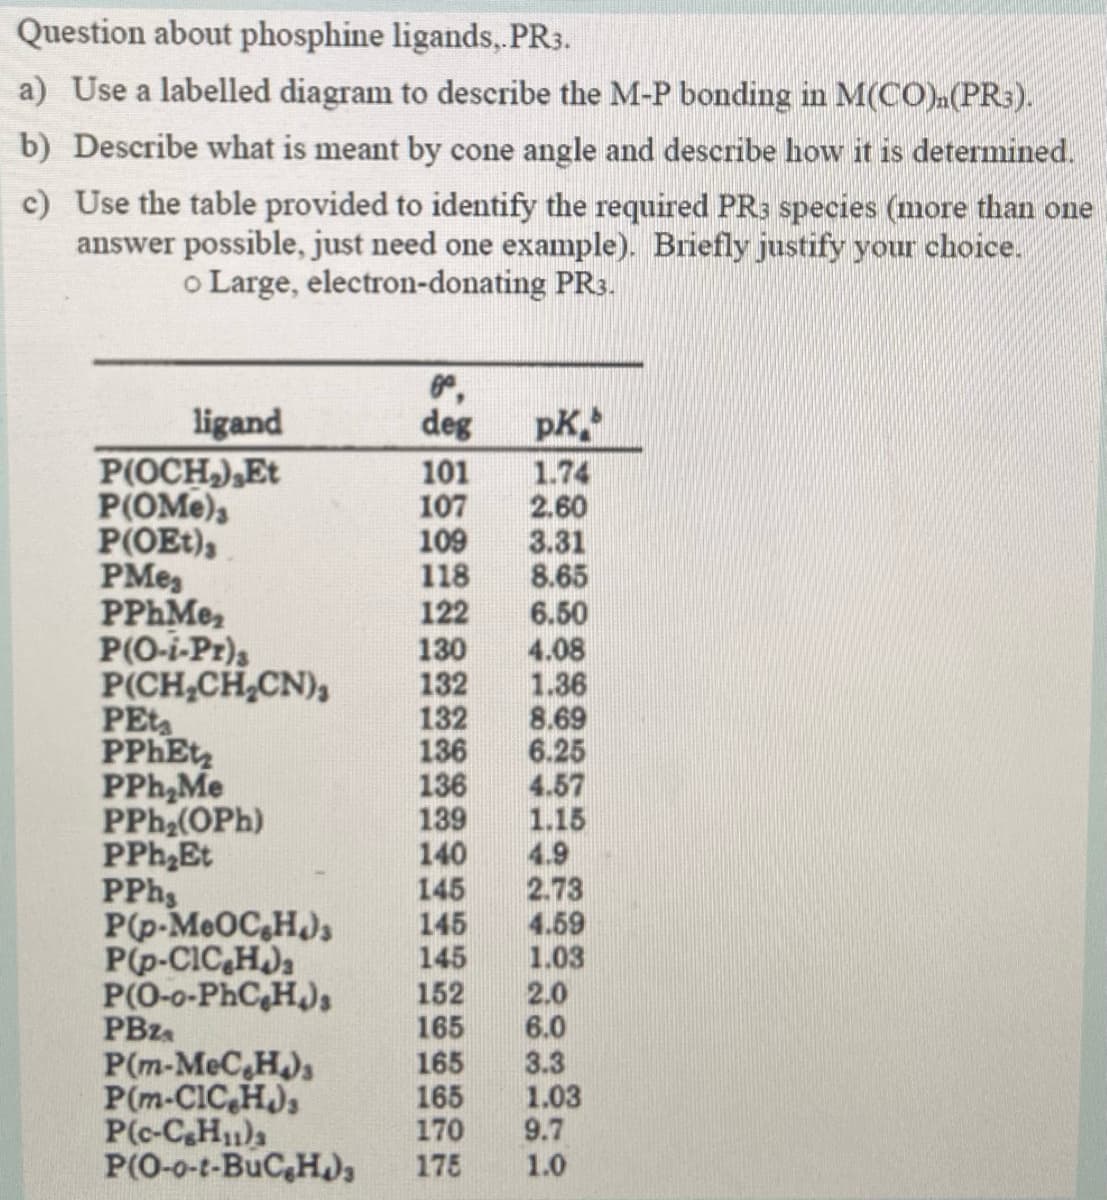 Question about phosphine ligands, PR3.
a) Use a labelled diagram to describe the M-P bonding in M(CO)n(PR3).
b) Describe what is meant by cone angle and describe how it is determined.
c) Use the table provided to identify the required PR3 species (more than one
answer possible, just need one example). Briefly justify your choice.
o Large, electron-donating PR3.
ligand
P(OCH),Et
P(OMe),
P(OEt),
PMes
PPhMe,
P(O-i-Pr)s
P(CH,CH,CN),
PEt
PPhEt
PPh,Me
PPh (OPh)
PPh,Et
PPh,
P(p-MeOC,H),
Pp-CIC,H).
P(0-0-PhC,H),
PBZA
P(m-MeC,H.),
P(m-CIC,H.),
P(c-CH1)a
P(O-0-t-BuC Hda
deg
pK.
101
107
109
118
122
130
132
132
136
136
139
140
145
145
145
1.74
2.60
3.31
8.65
6.50
4.08
1.36
8.69
6.25
4.57
1.15
4.9
2.73
4.59
1.03
2.0
6.0
3.3
1.03
9.7
152
165
165
165
170
175
1.0
